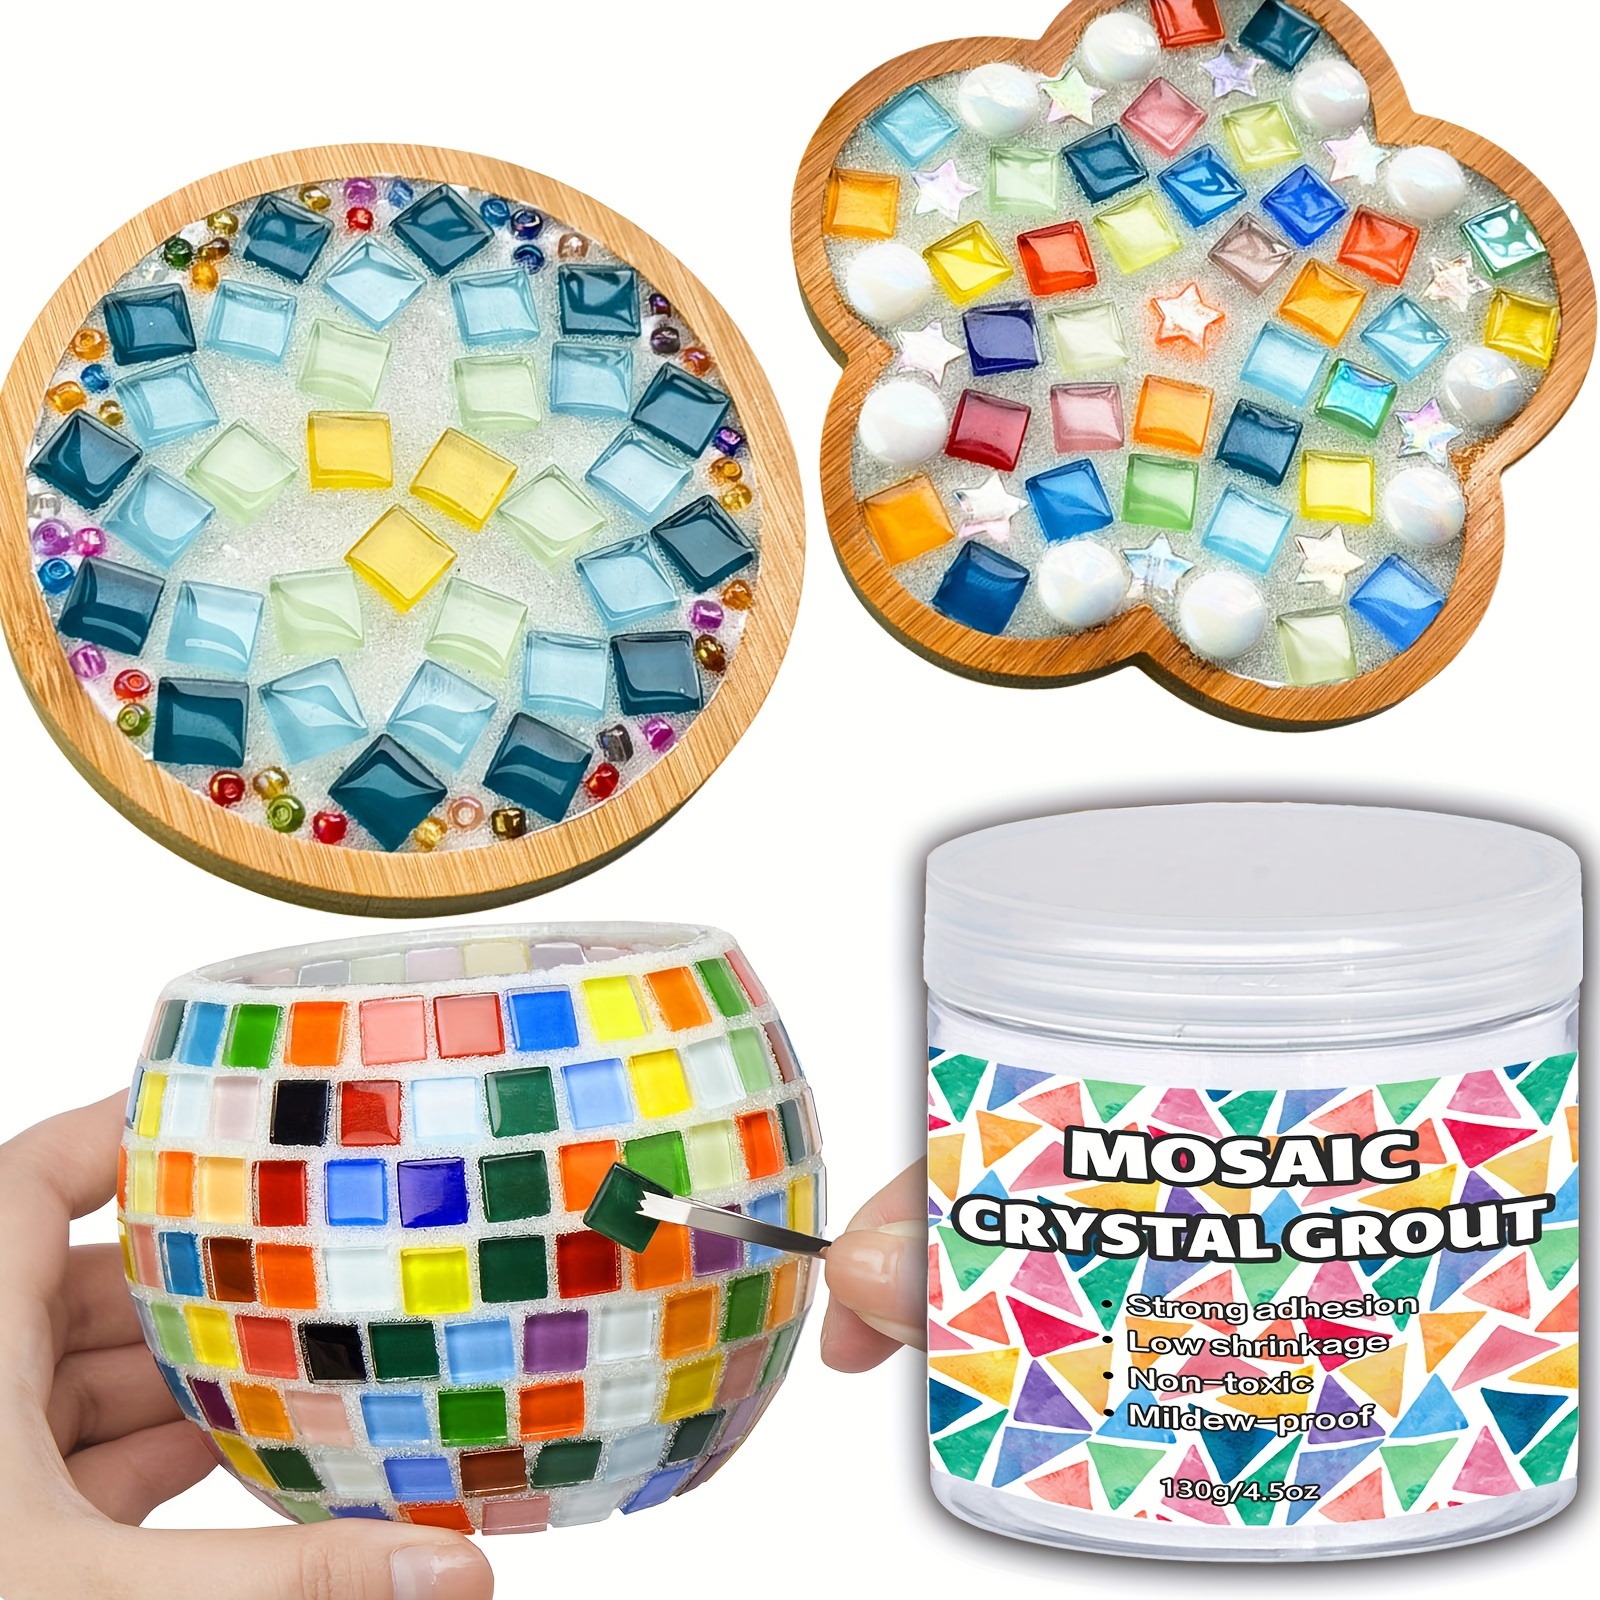 

stunning Glass" Diy Mosaic Coaster Kit With 130g Crystal Clear White Grout - Craft Your Own Colorful Glass Tile Designs, Handmade Home Decor & Art Gift Set For Adults